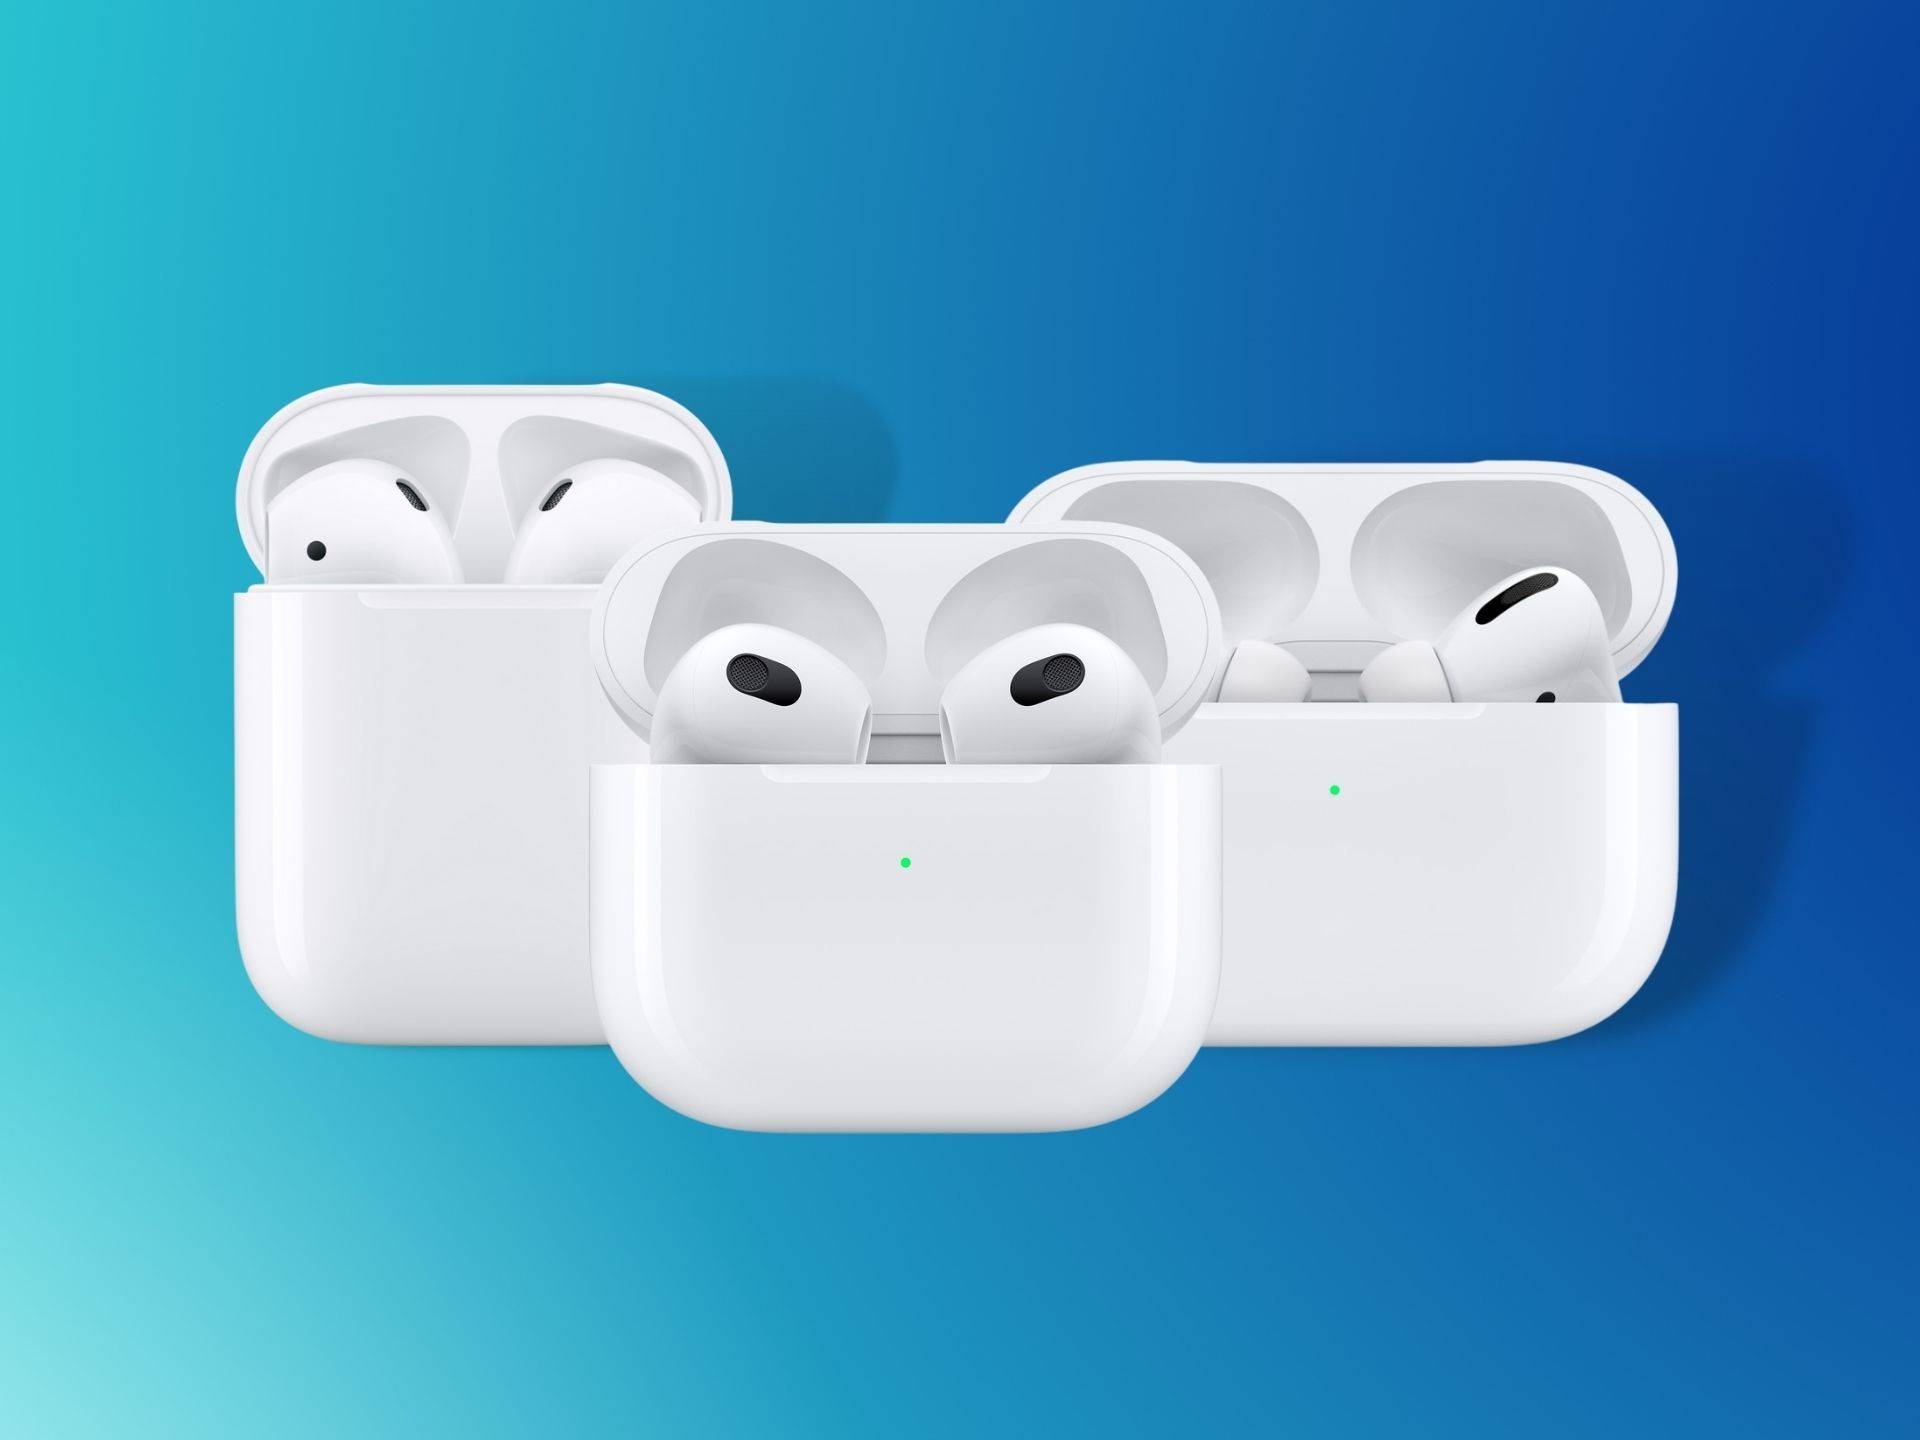 Apple AirPods 2, AirPods 3, and AirPods Pro wireless earbuds